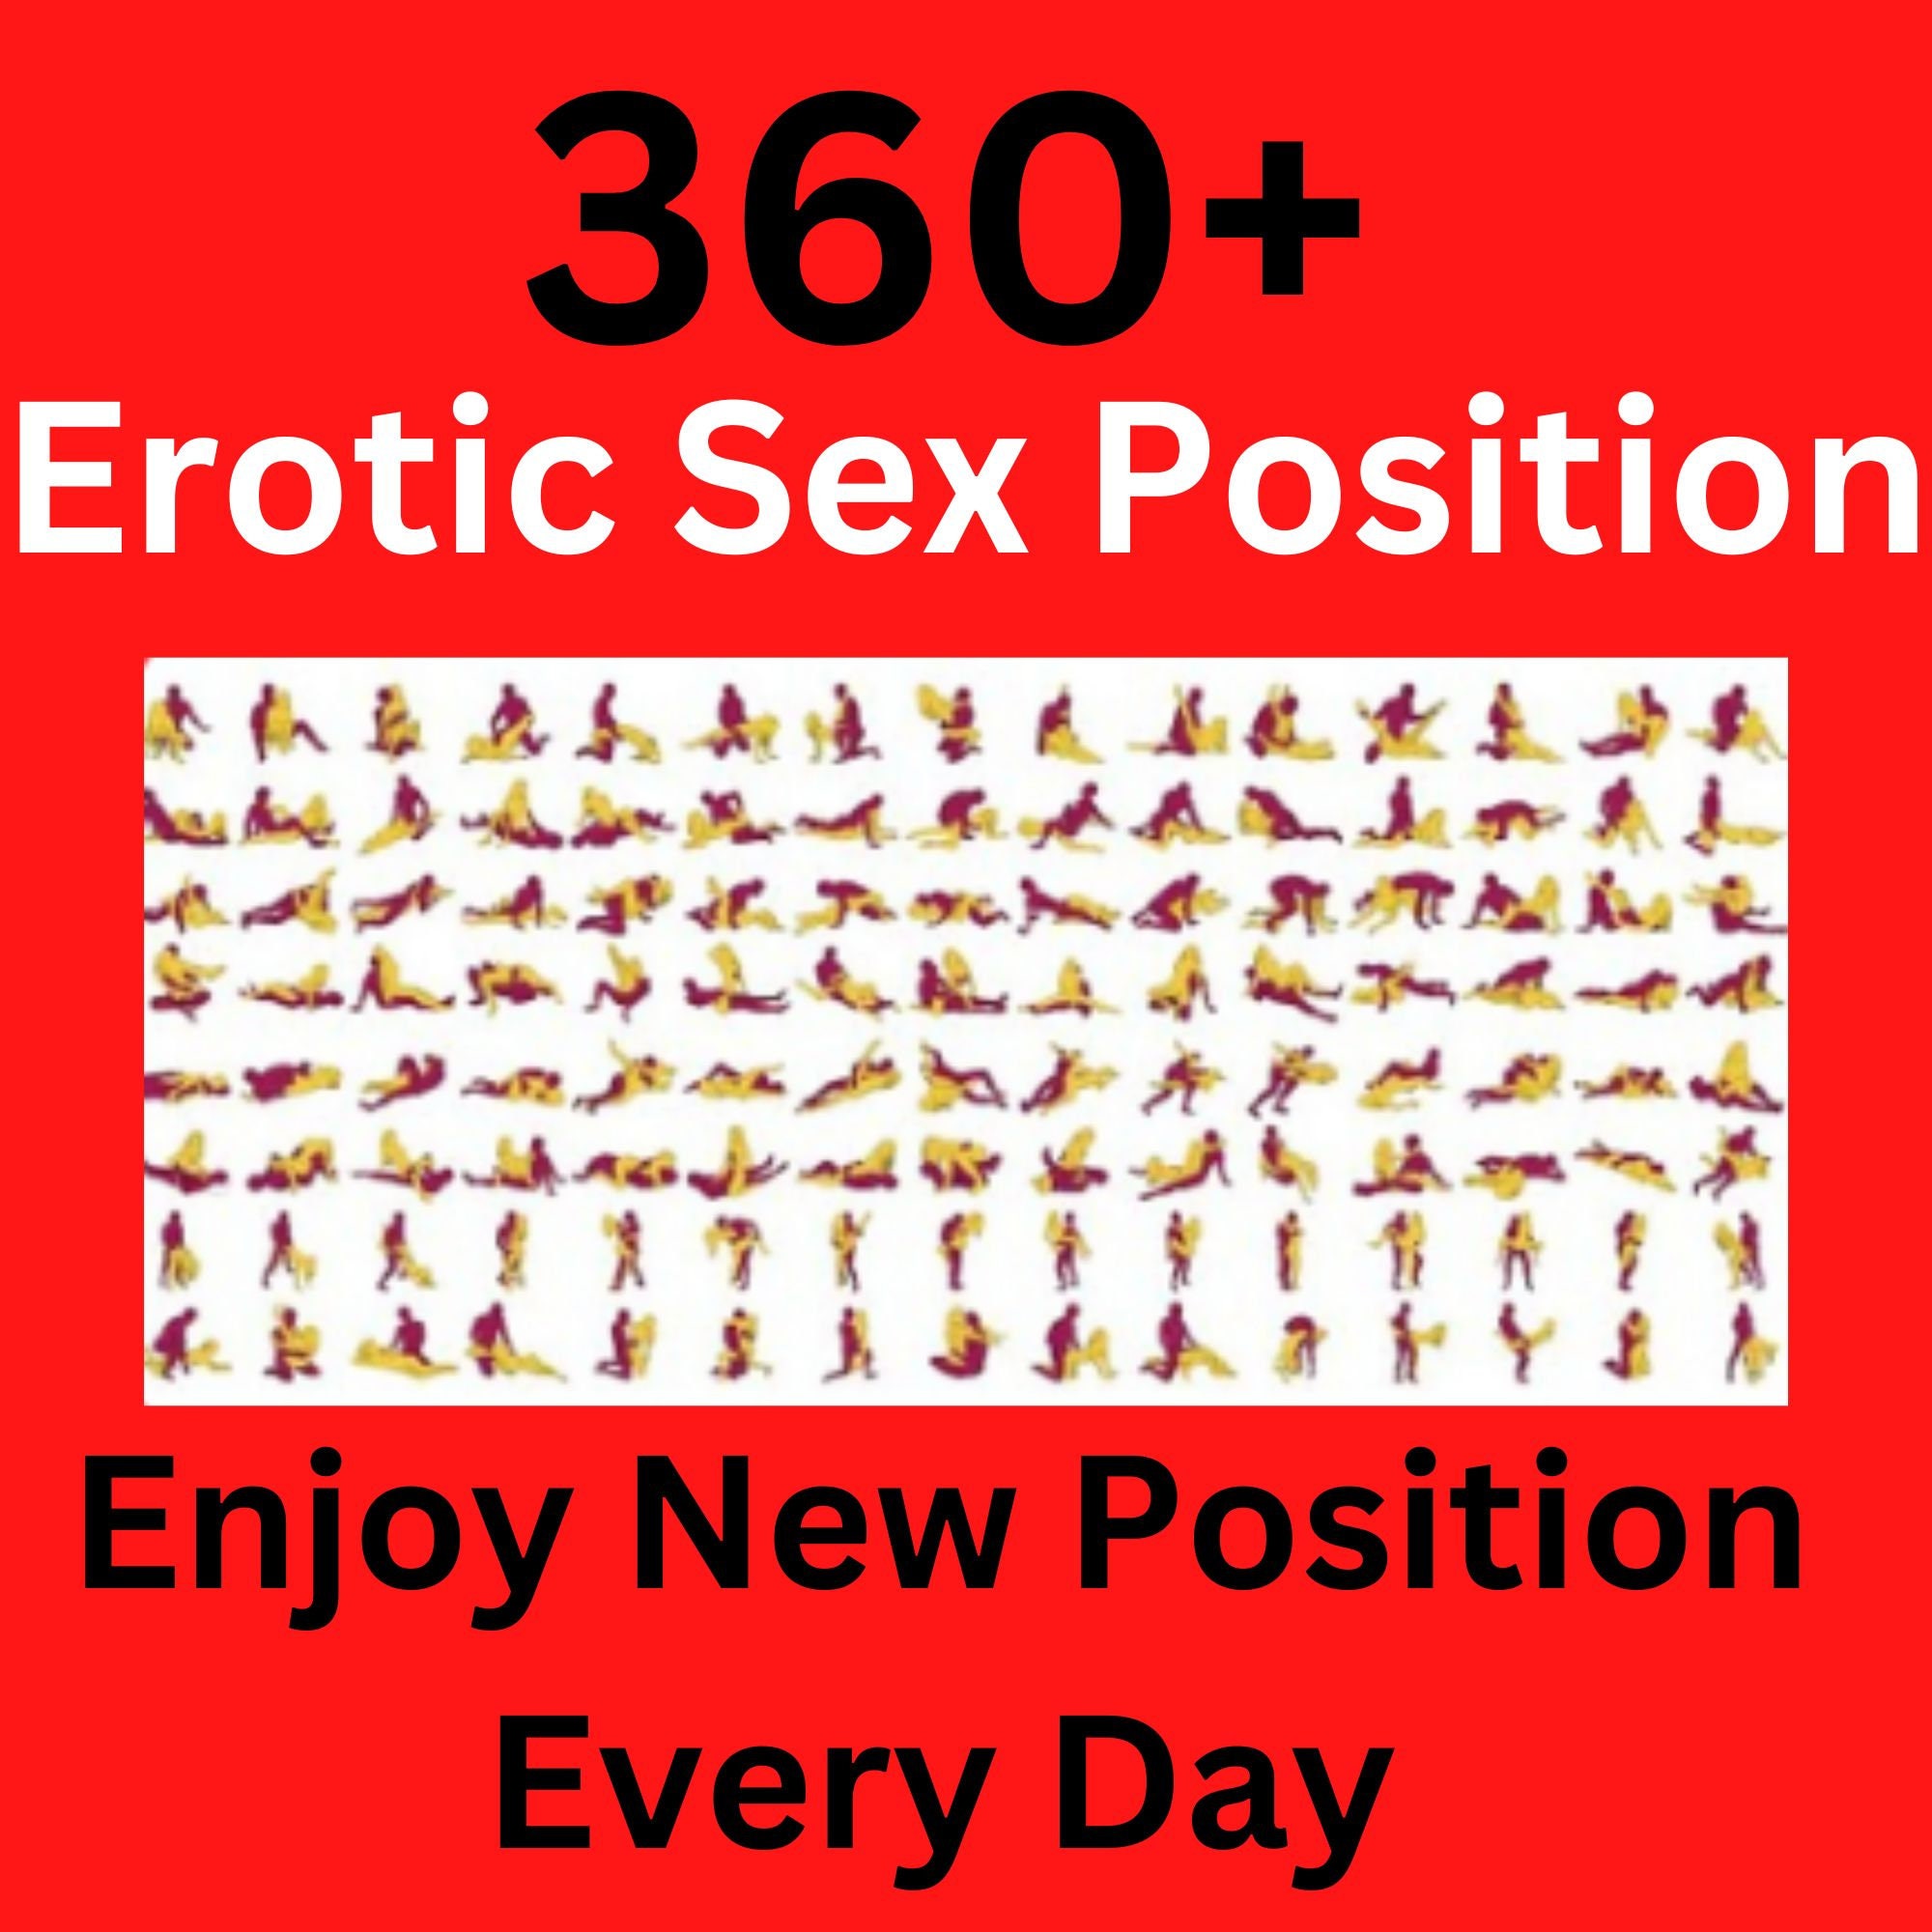 donnie lankford recommends all 365 sex positions pic